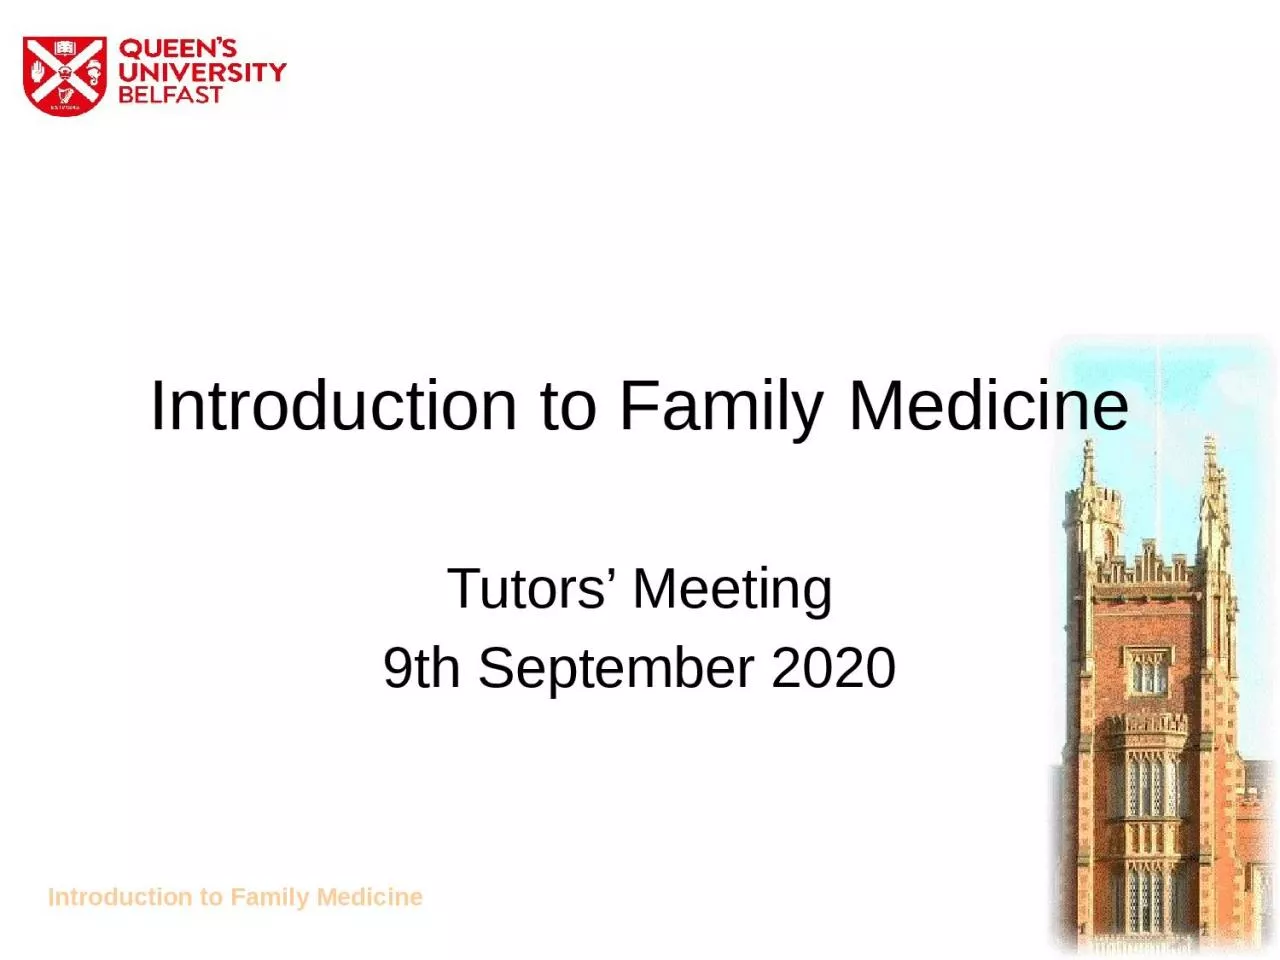 Introduction to Family Medicine